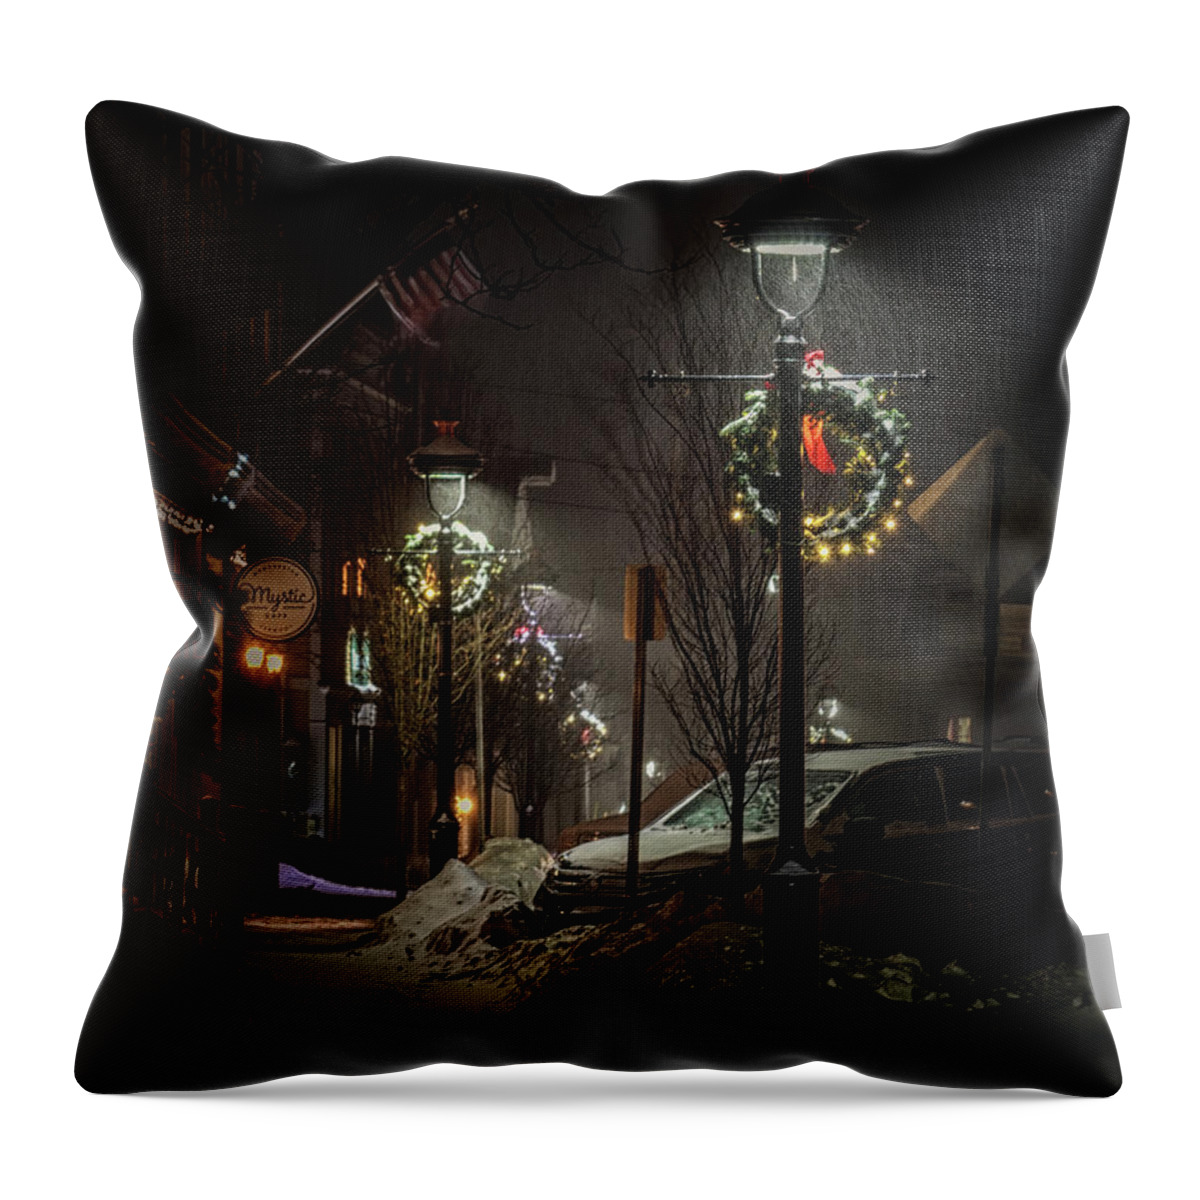 Lamp Throw Pillow featuring the photograph Christmas Lamppost by Rod Best